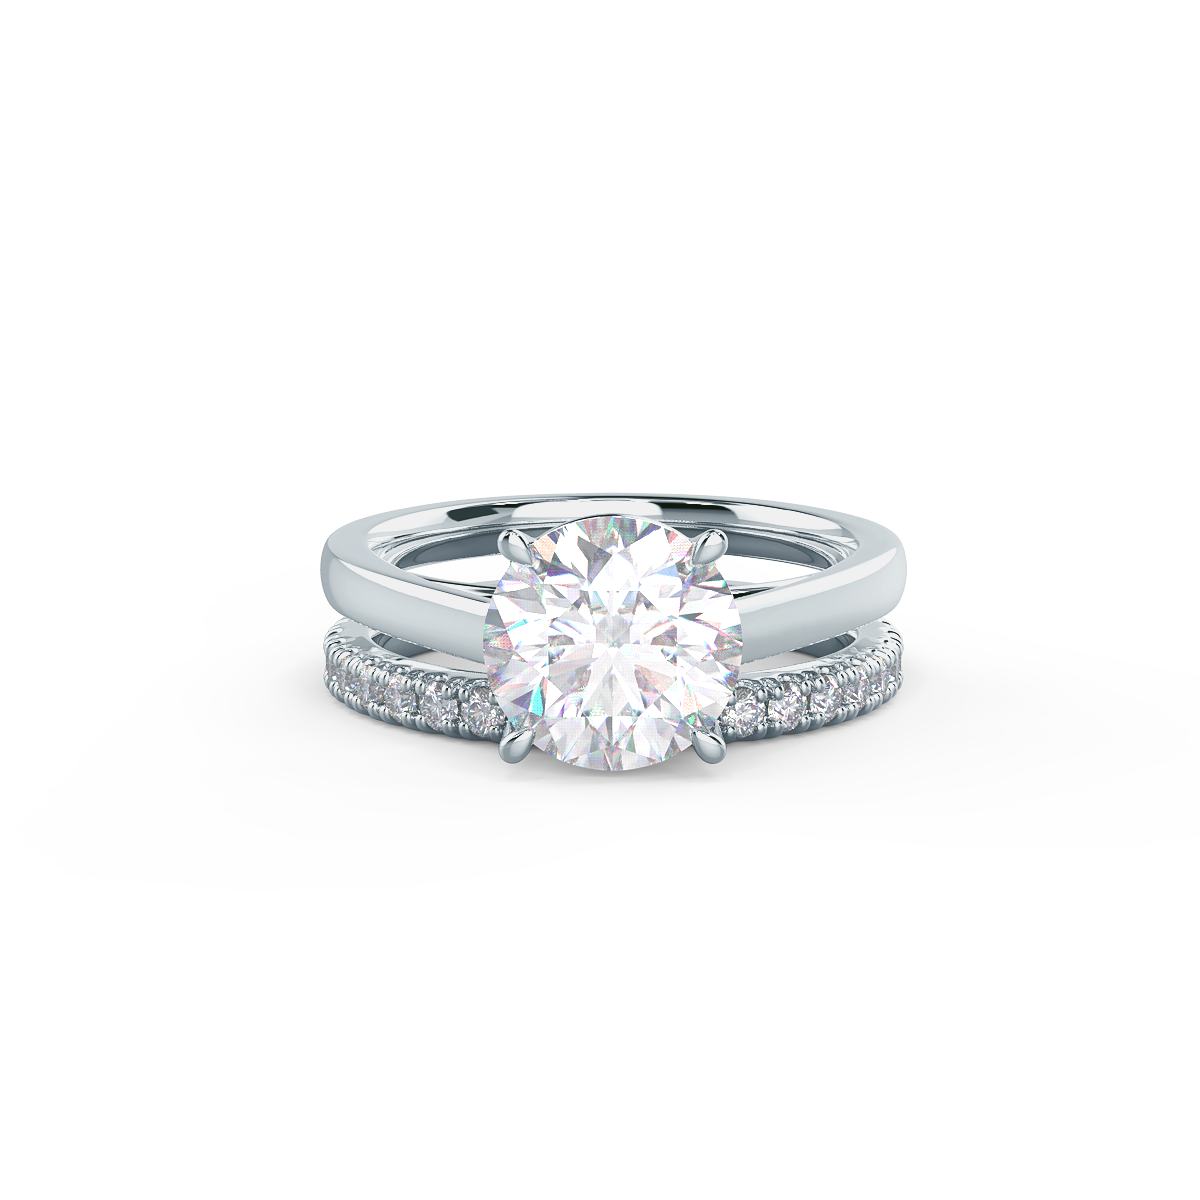  This setting pairs with a variety of wedding band styles.     Shop All Wedding Bands   